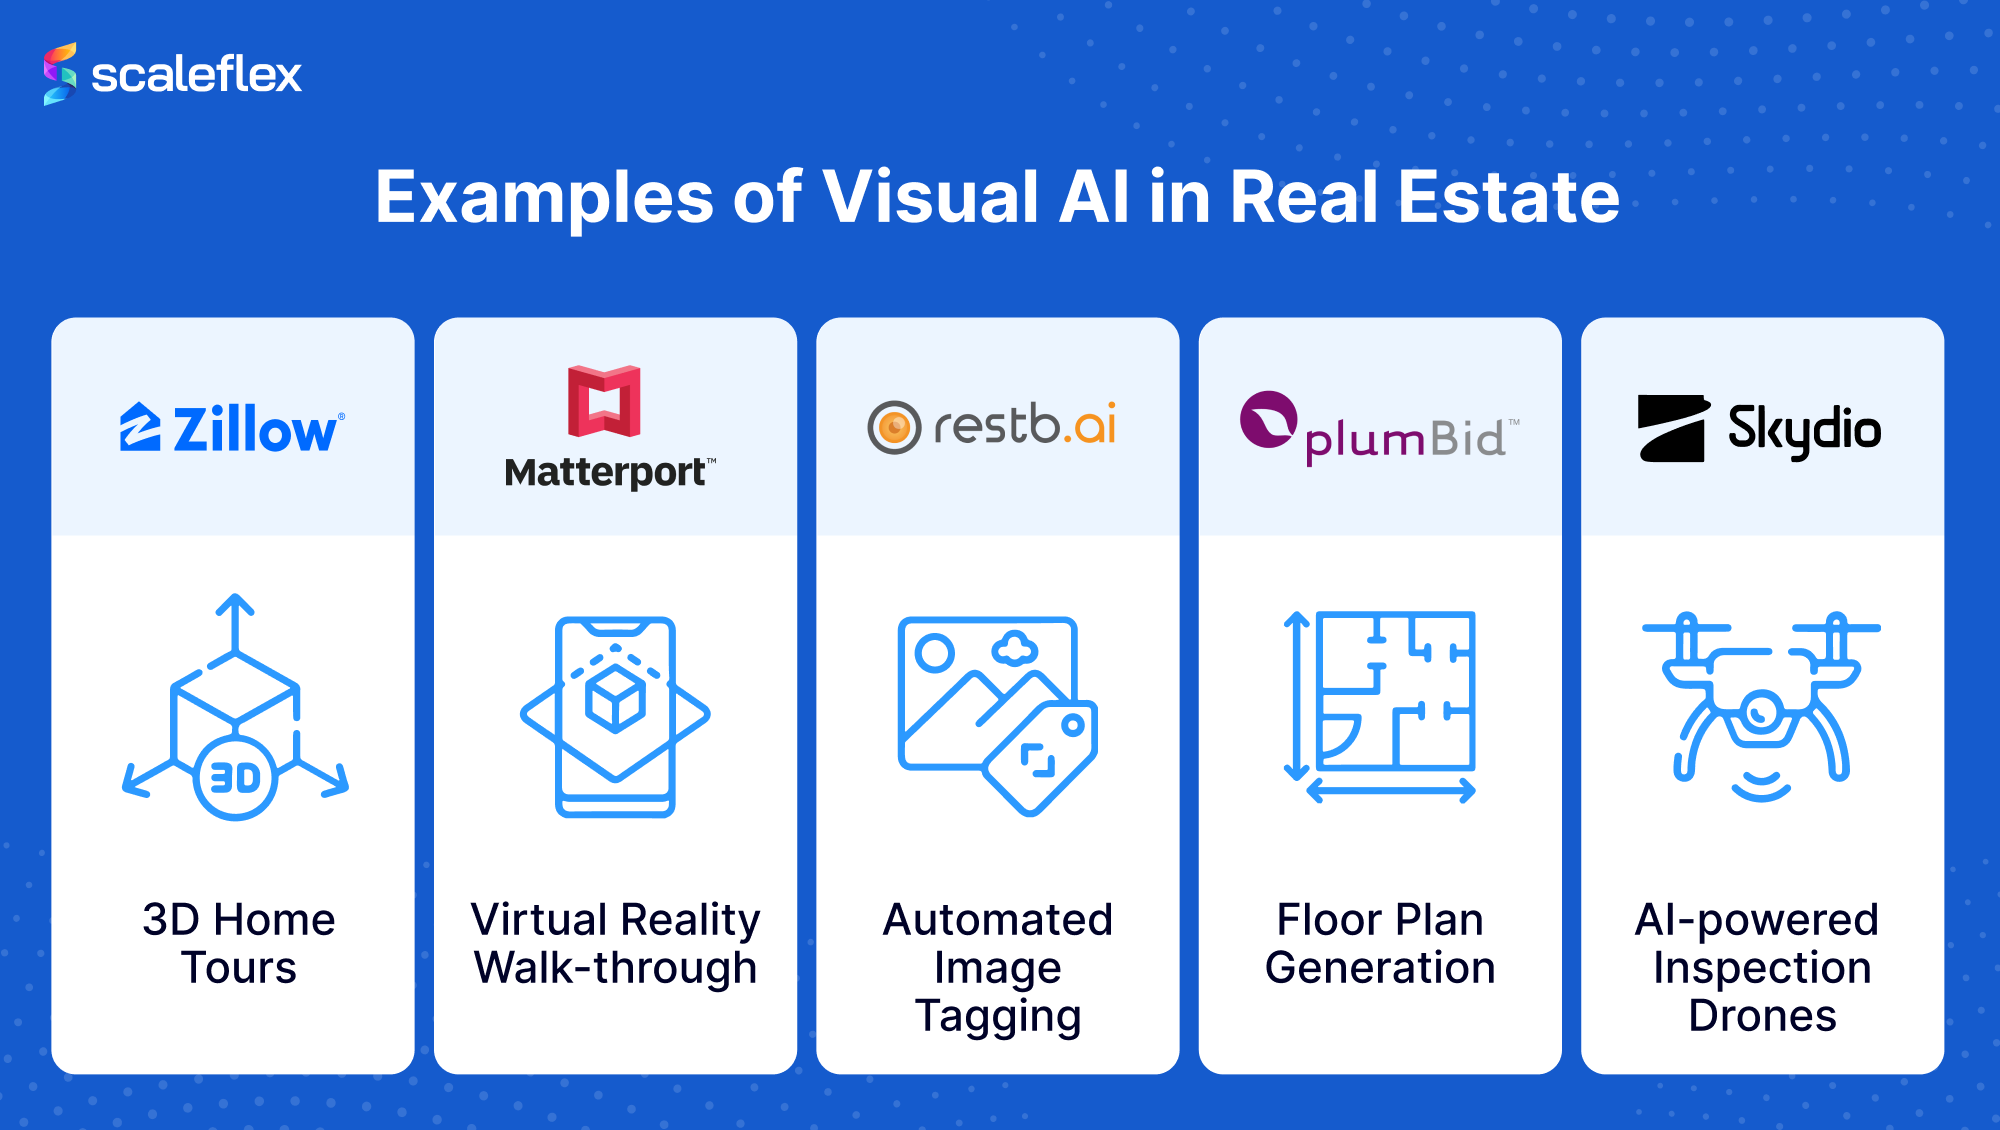 Logos of different real estate agencies paired with the use they make of Visual AI. 